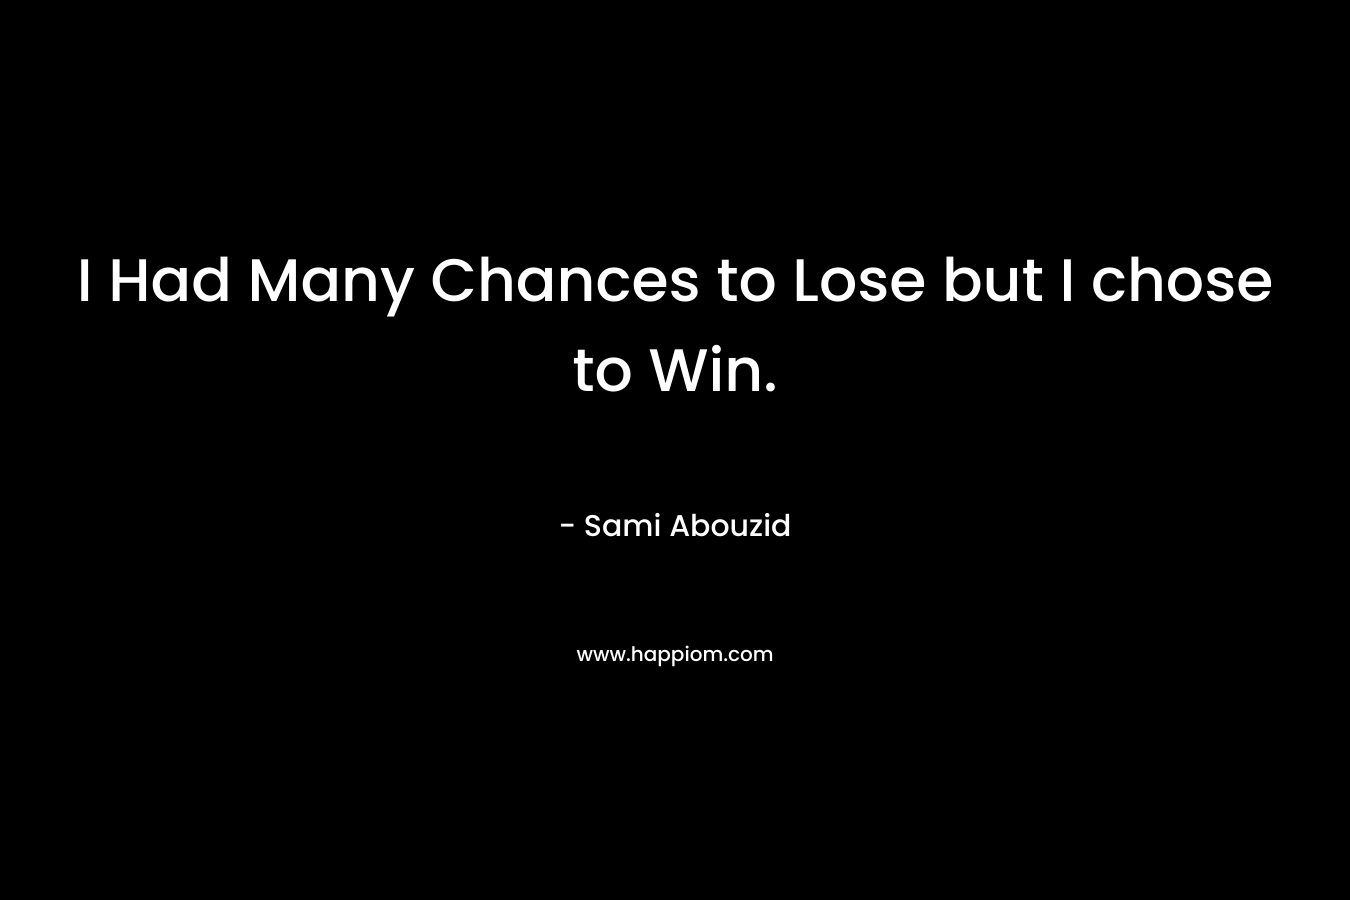 I Had Many Chances to Lose but I chose to Win.